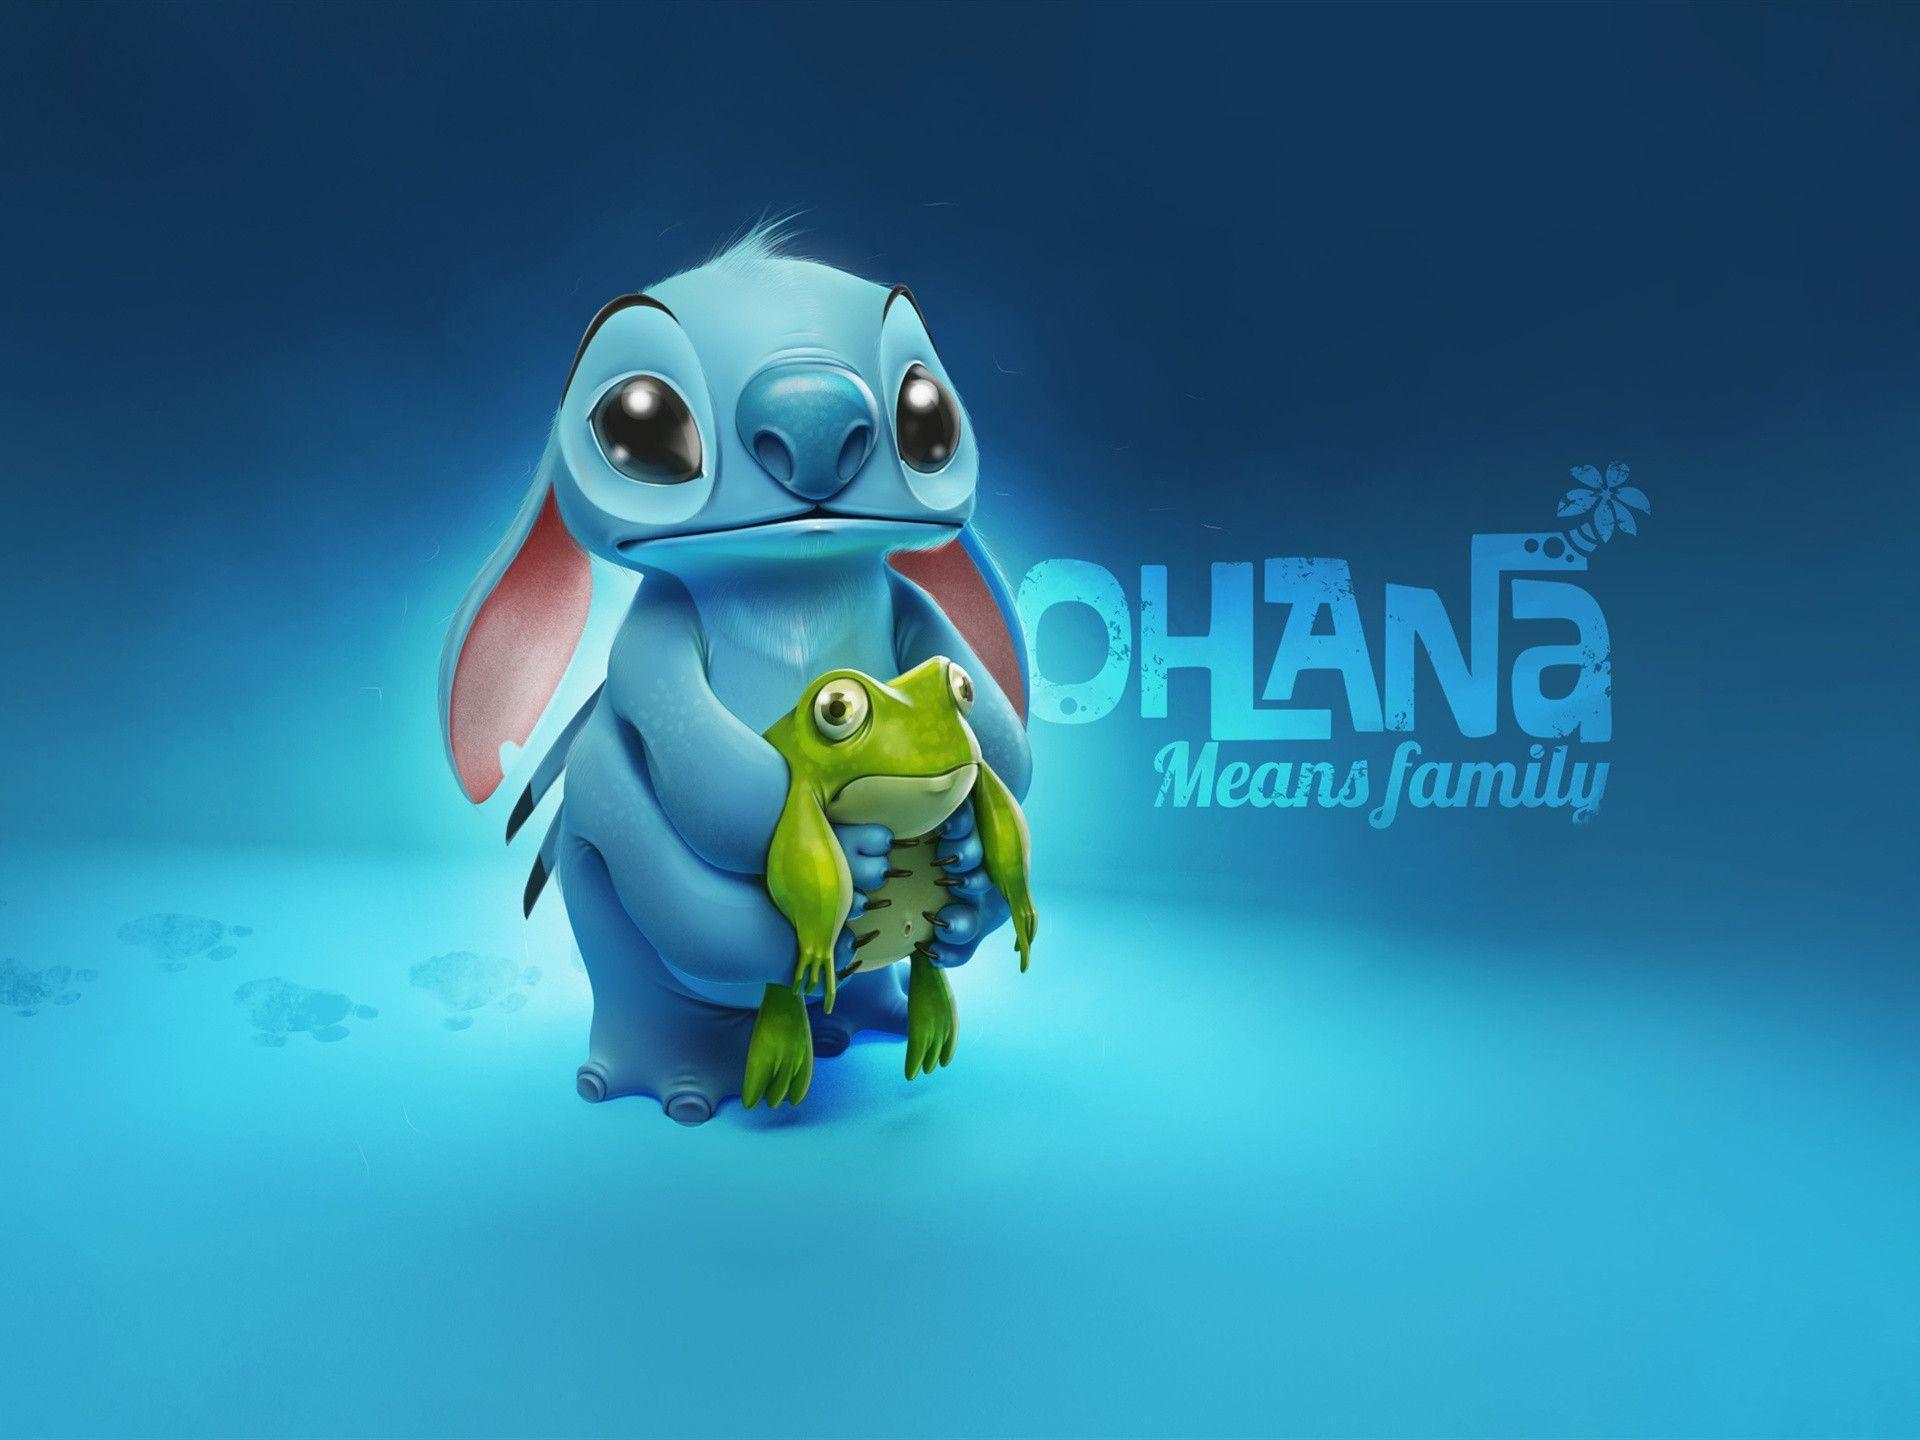 Stitch with frog Wallpaperx1440 resolution wallpaper